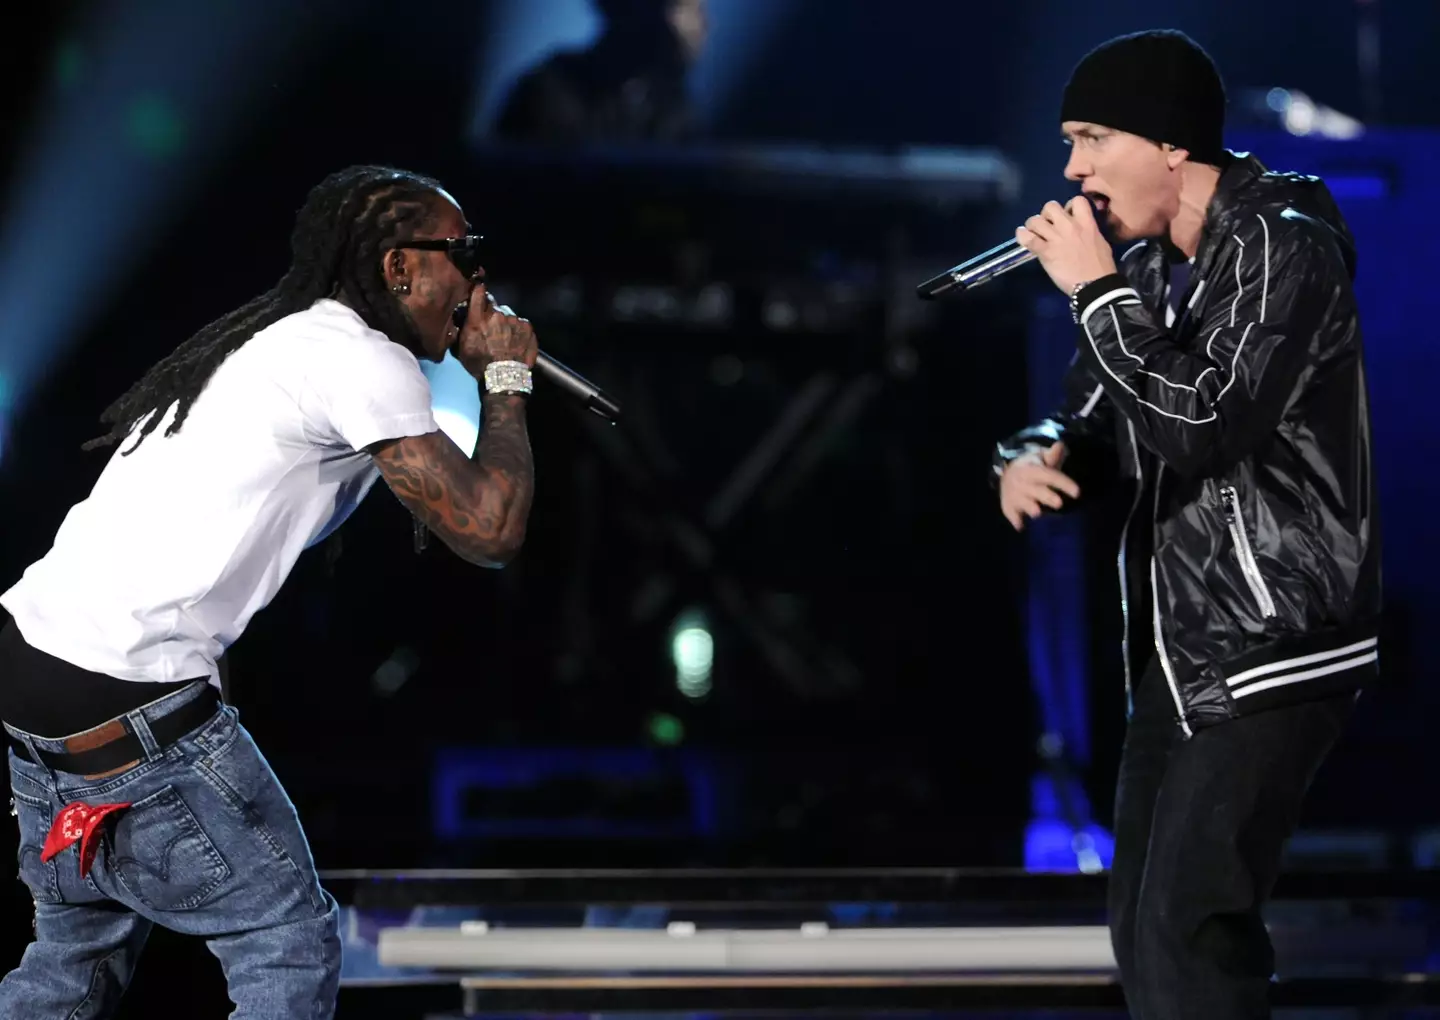 Lil Wayne and Eminem first worked together on 'Forever' with Drake and Kanye West.